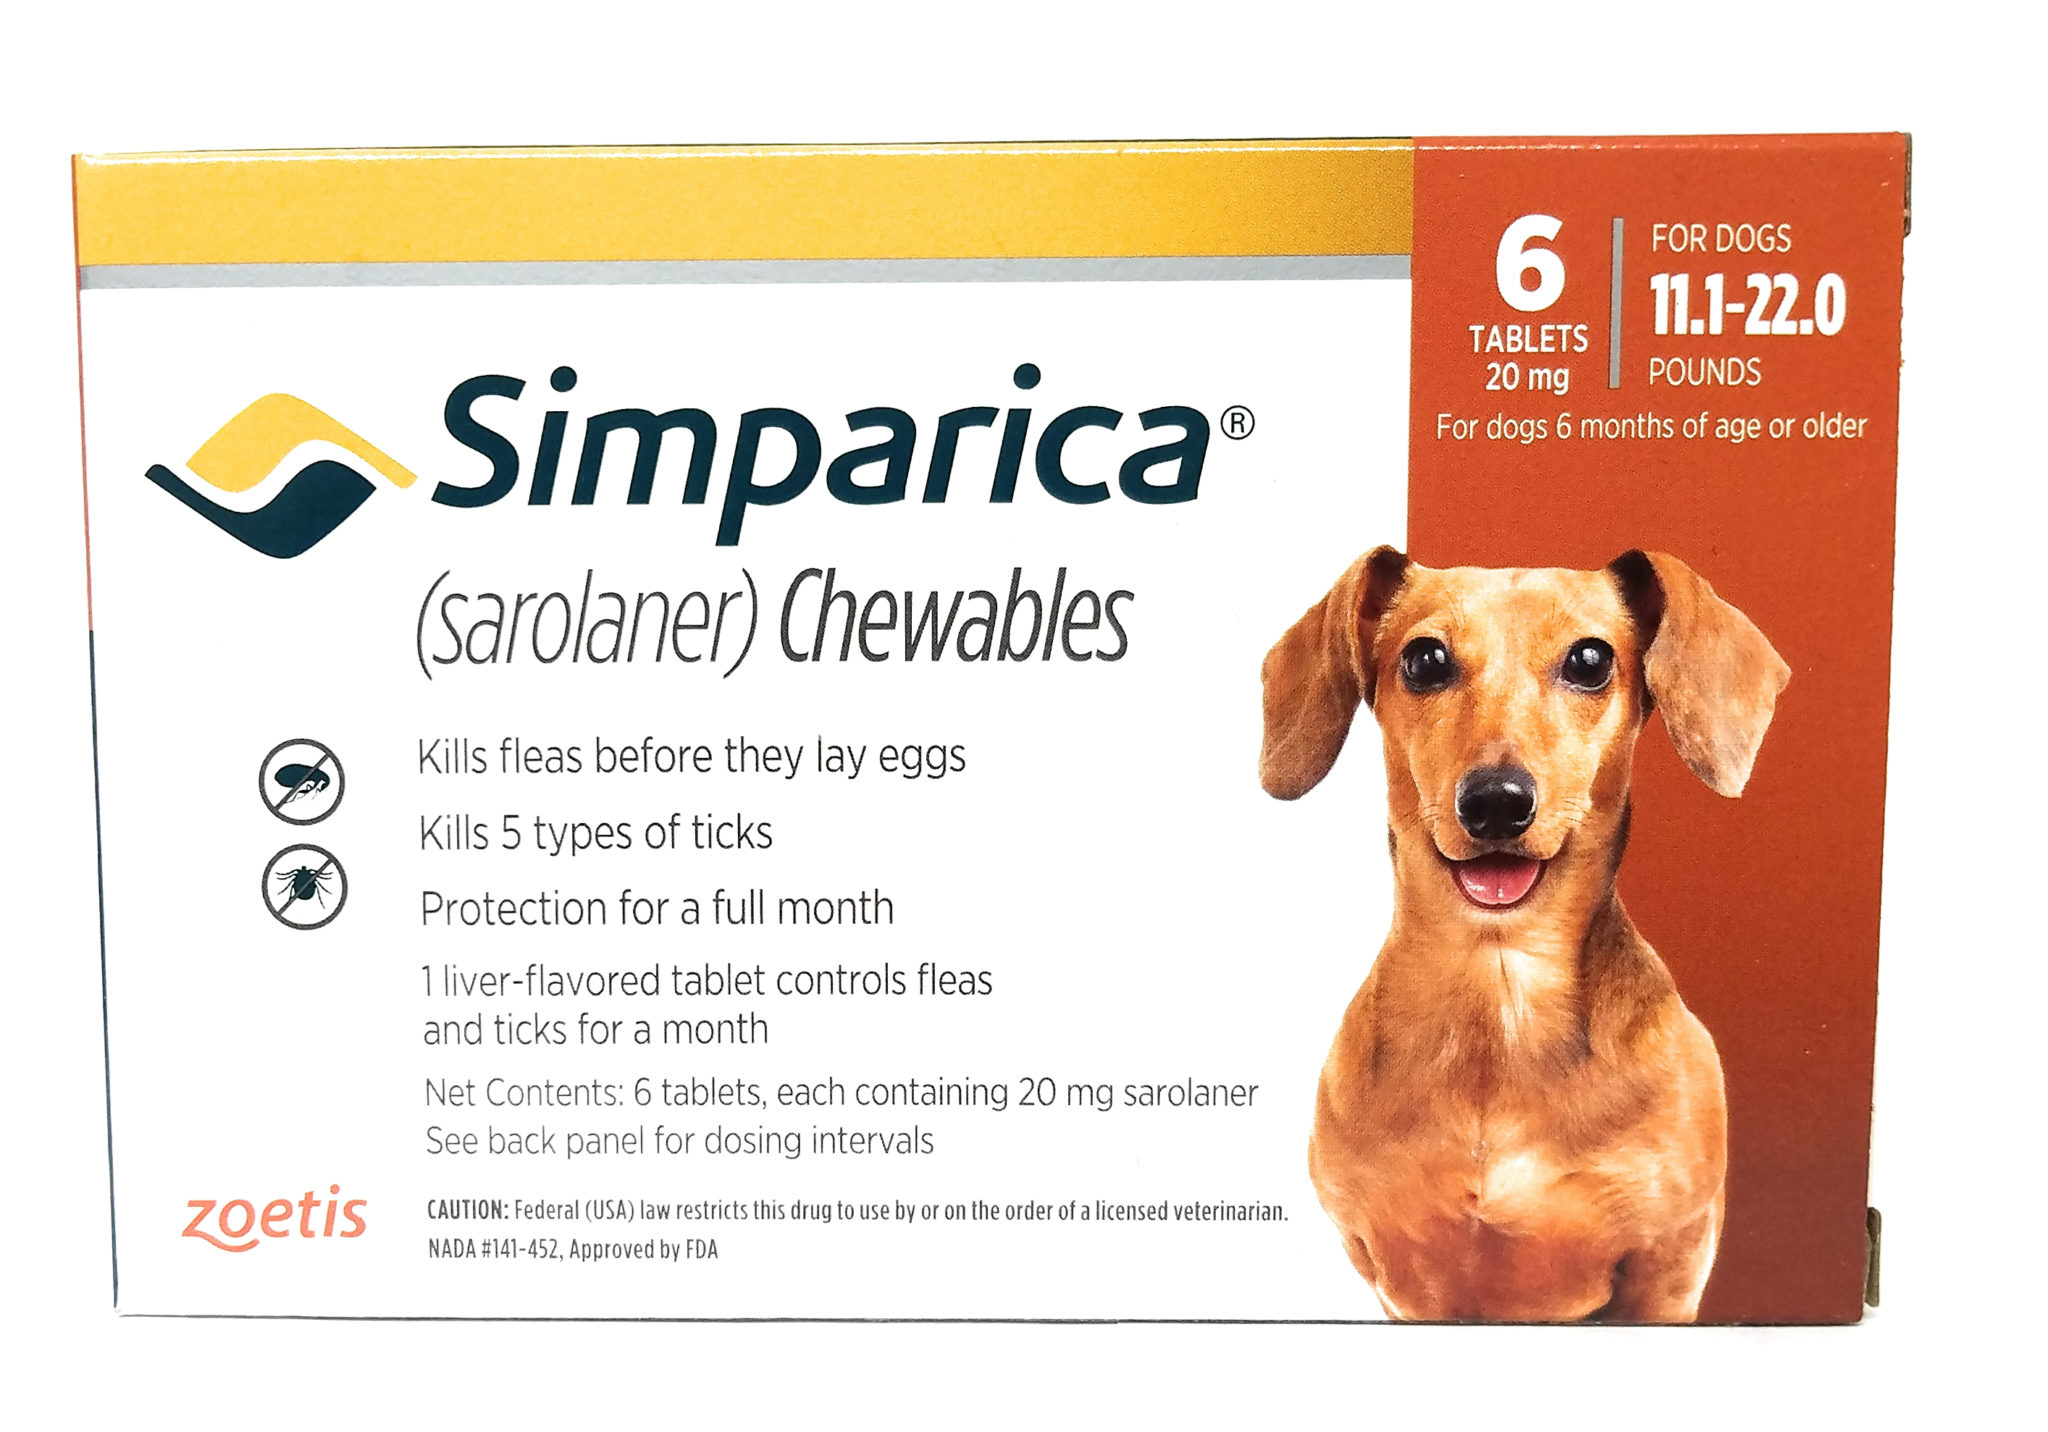 vet-approved-rx-simparica-chewable-tablets-orange-11-1-22lbs-6-dose-for